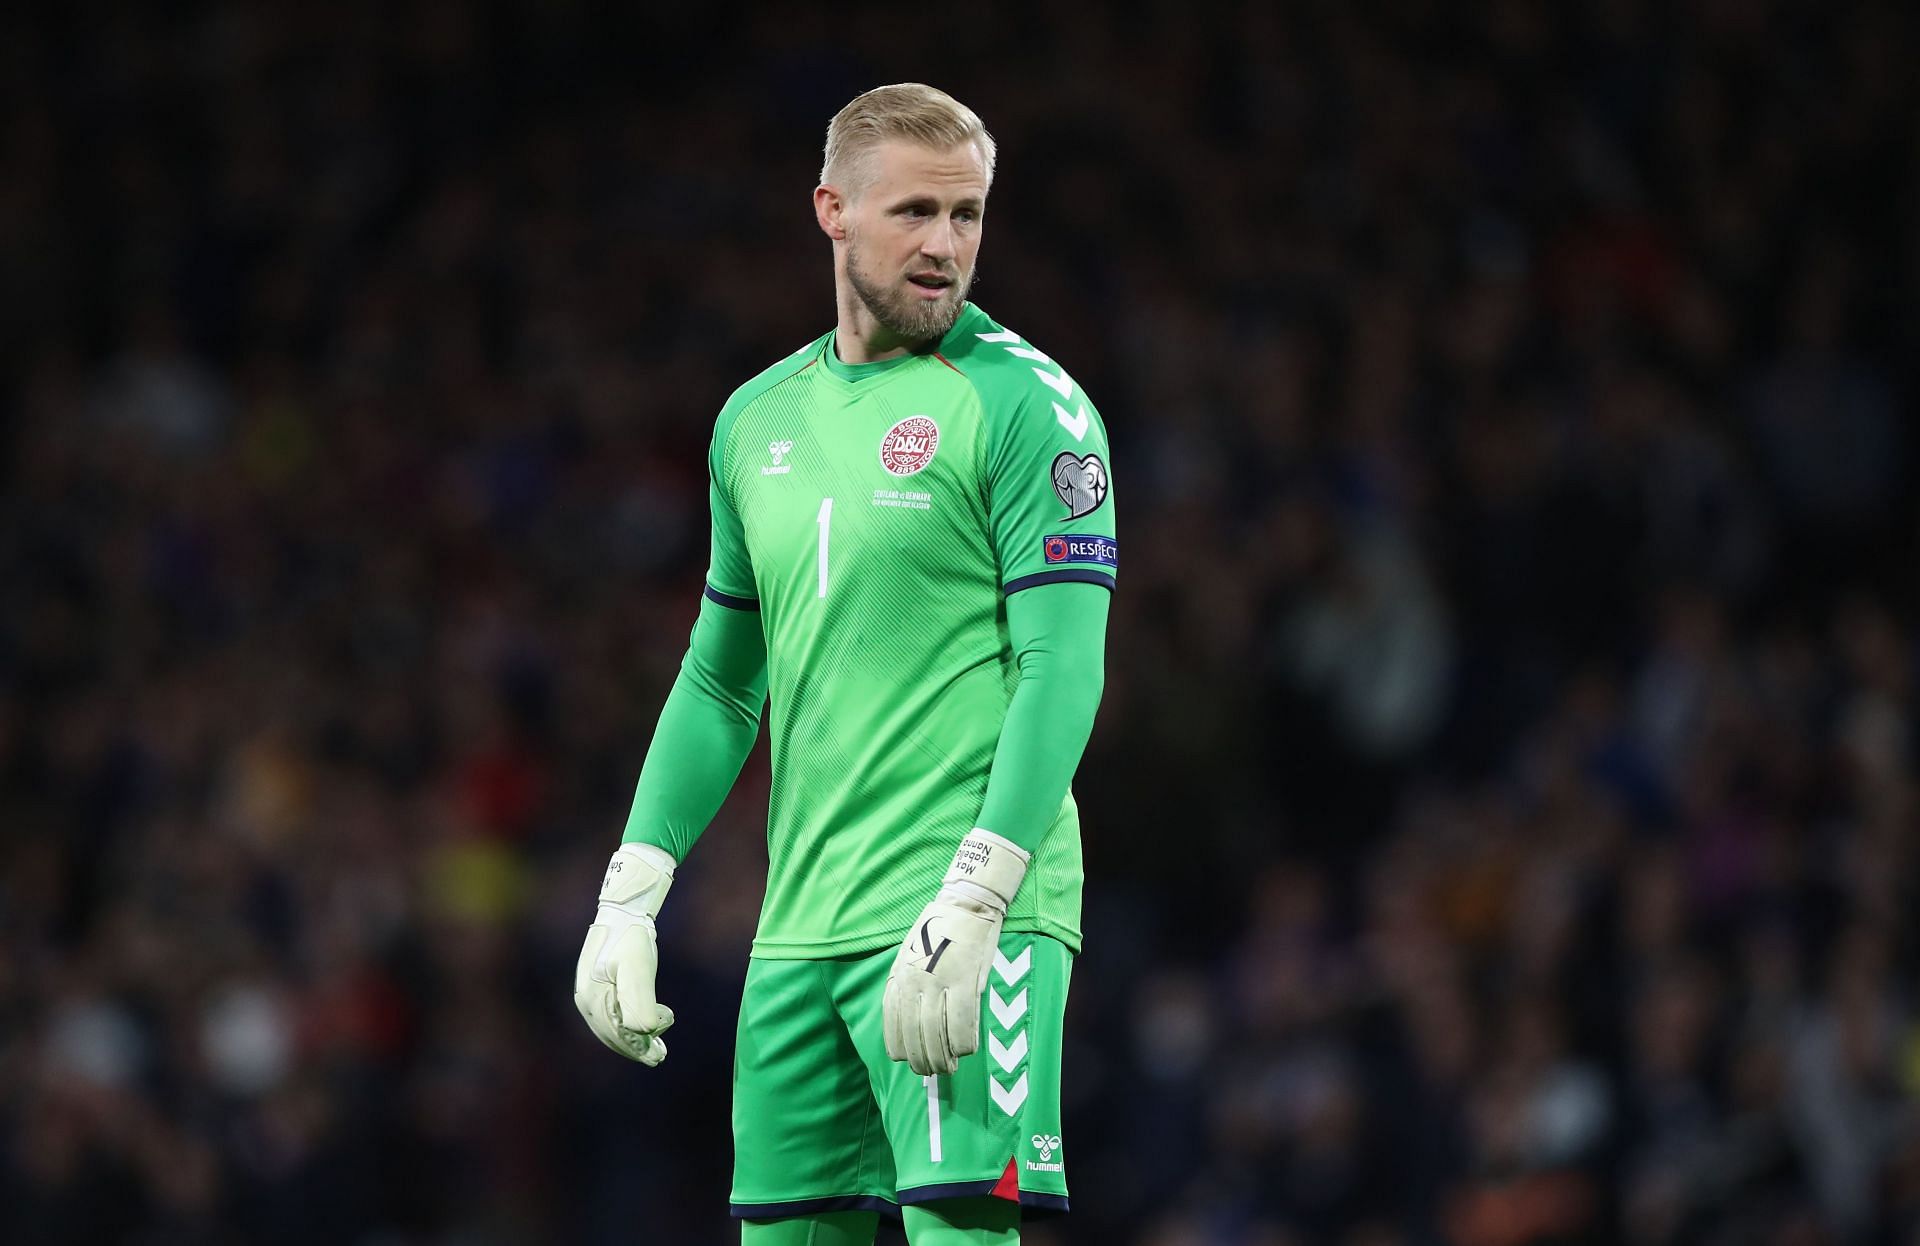 Kasper Schmeichel has been a mainstay at Leicester City for a while.